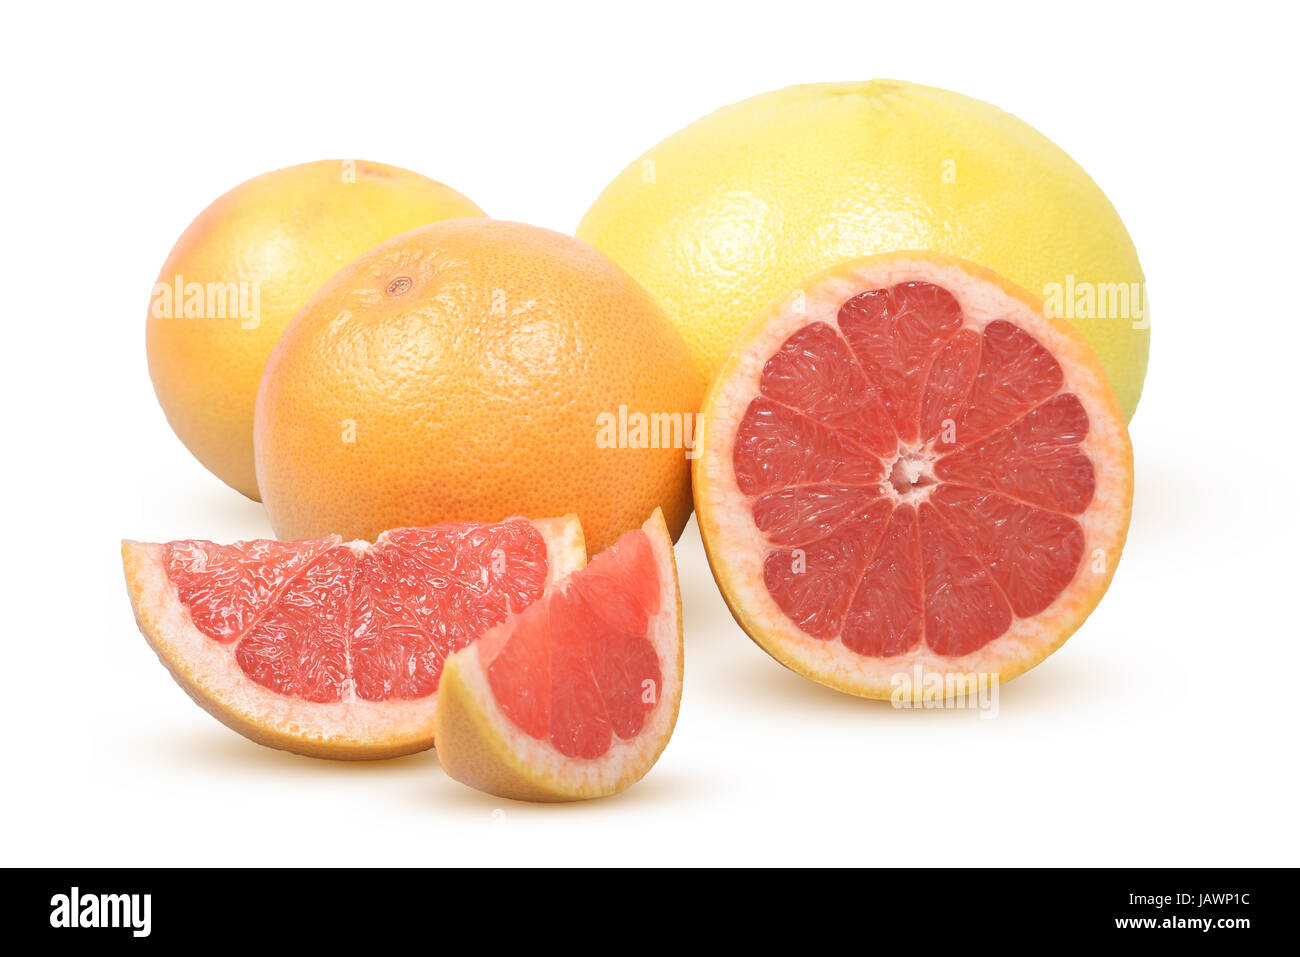 Ripe grapefruit composition on a white background Stock Photo